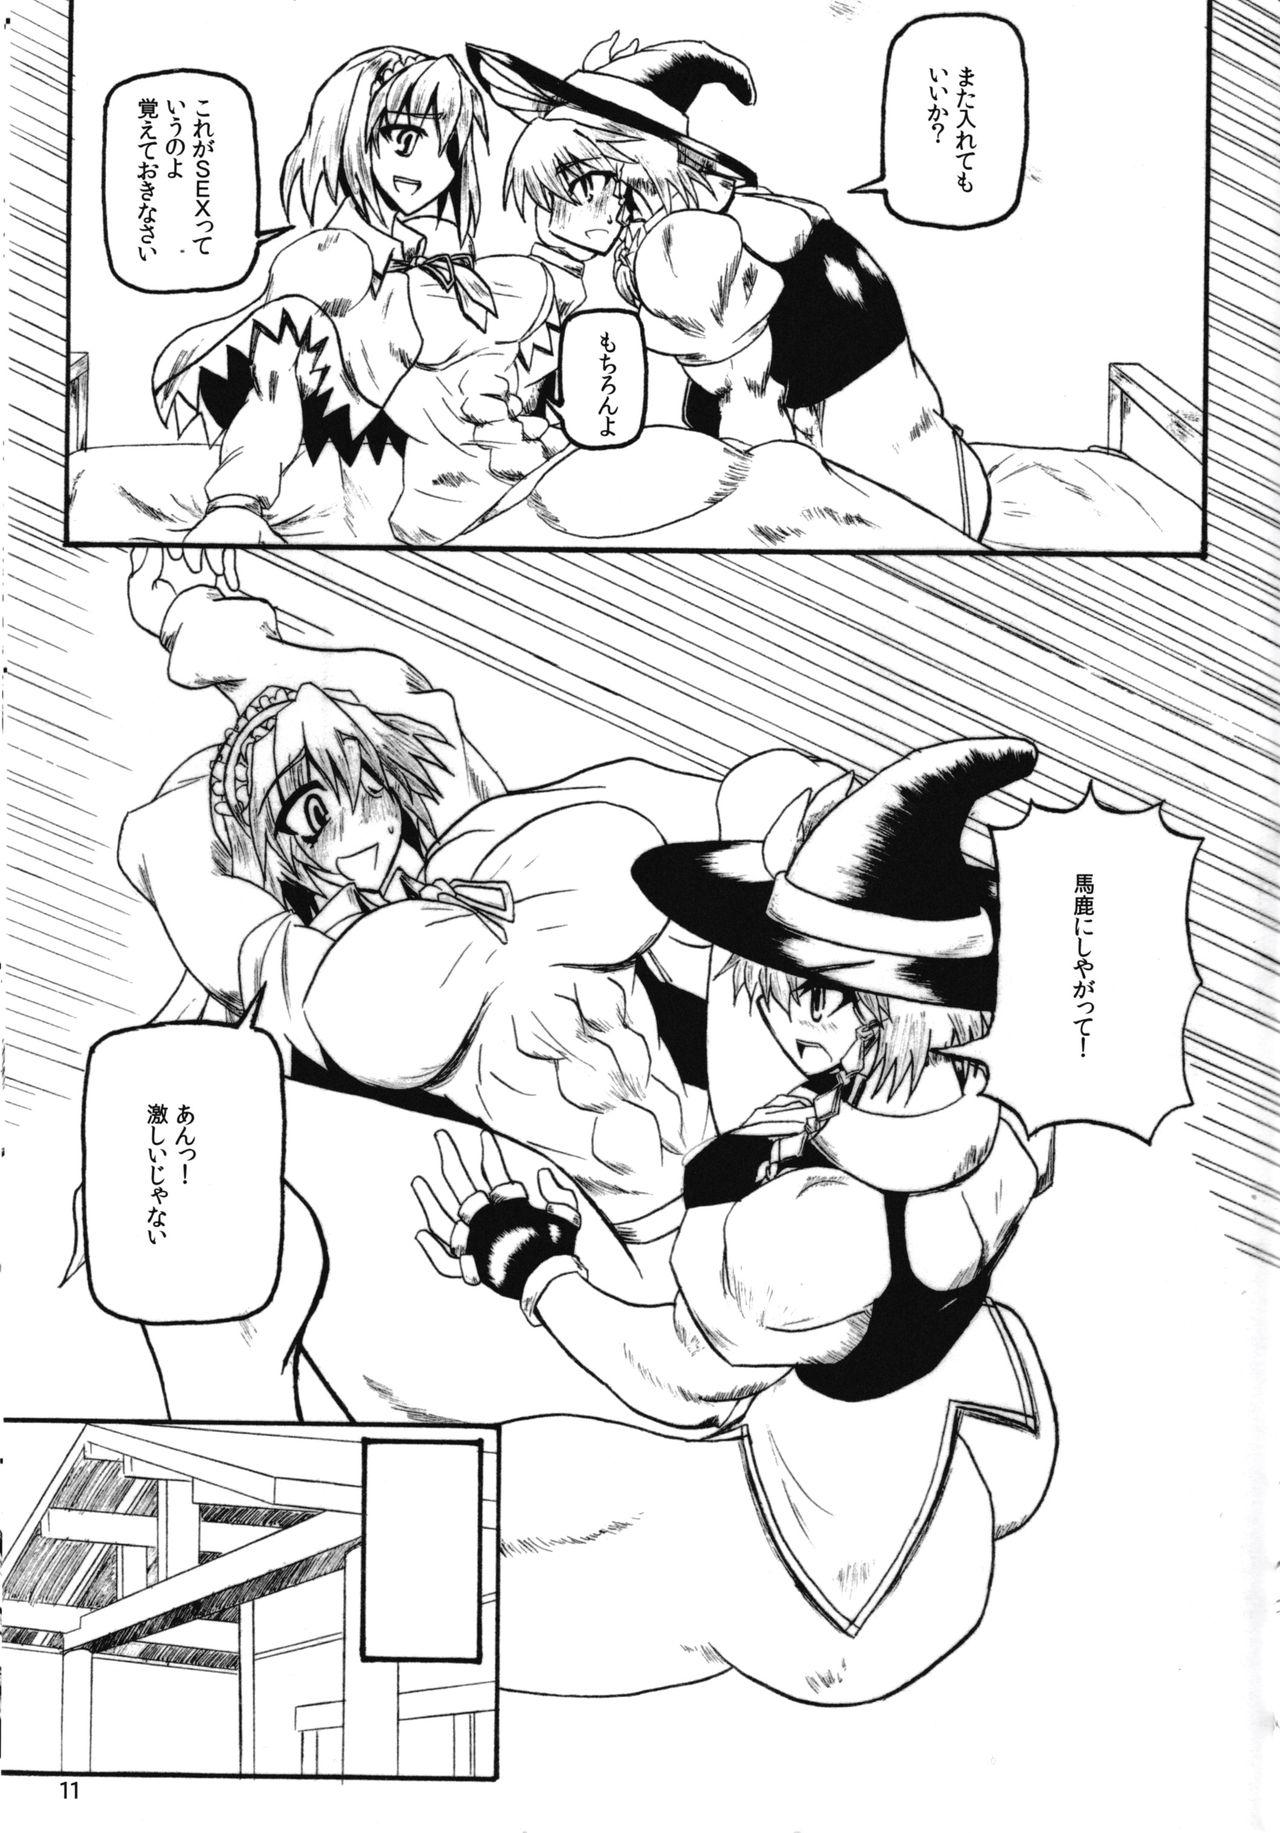 Amateur Exceeds Power of Human2 - Touhou project Teenage Porn - Page 11